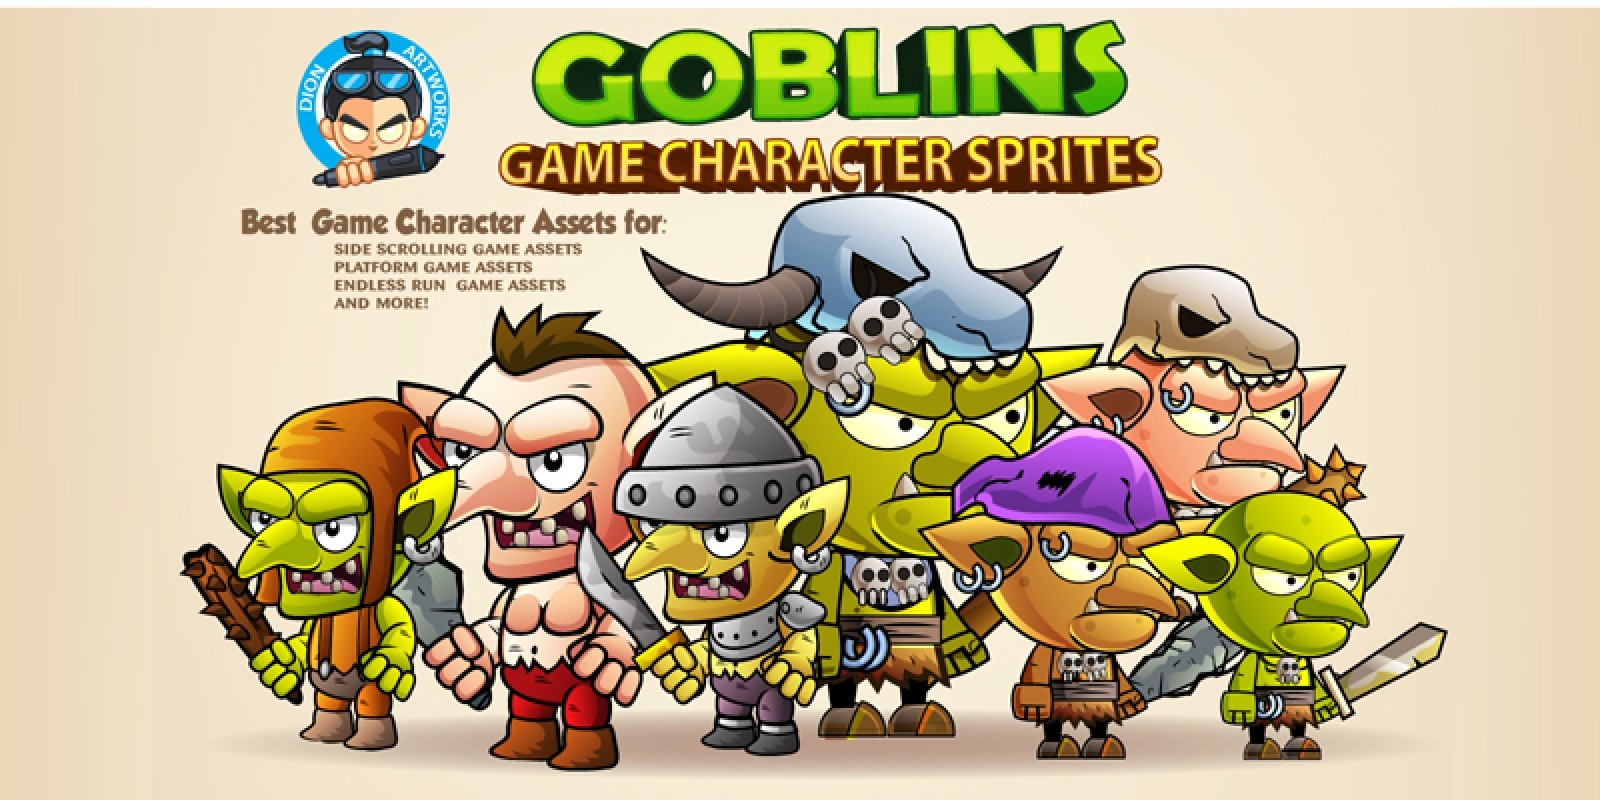 Goblins Characters